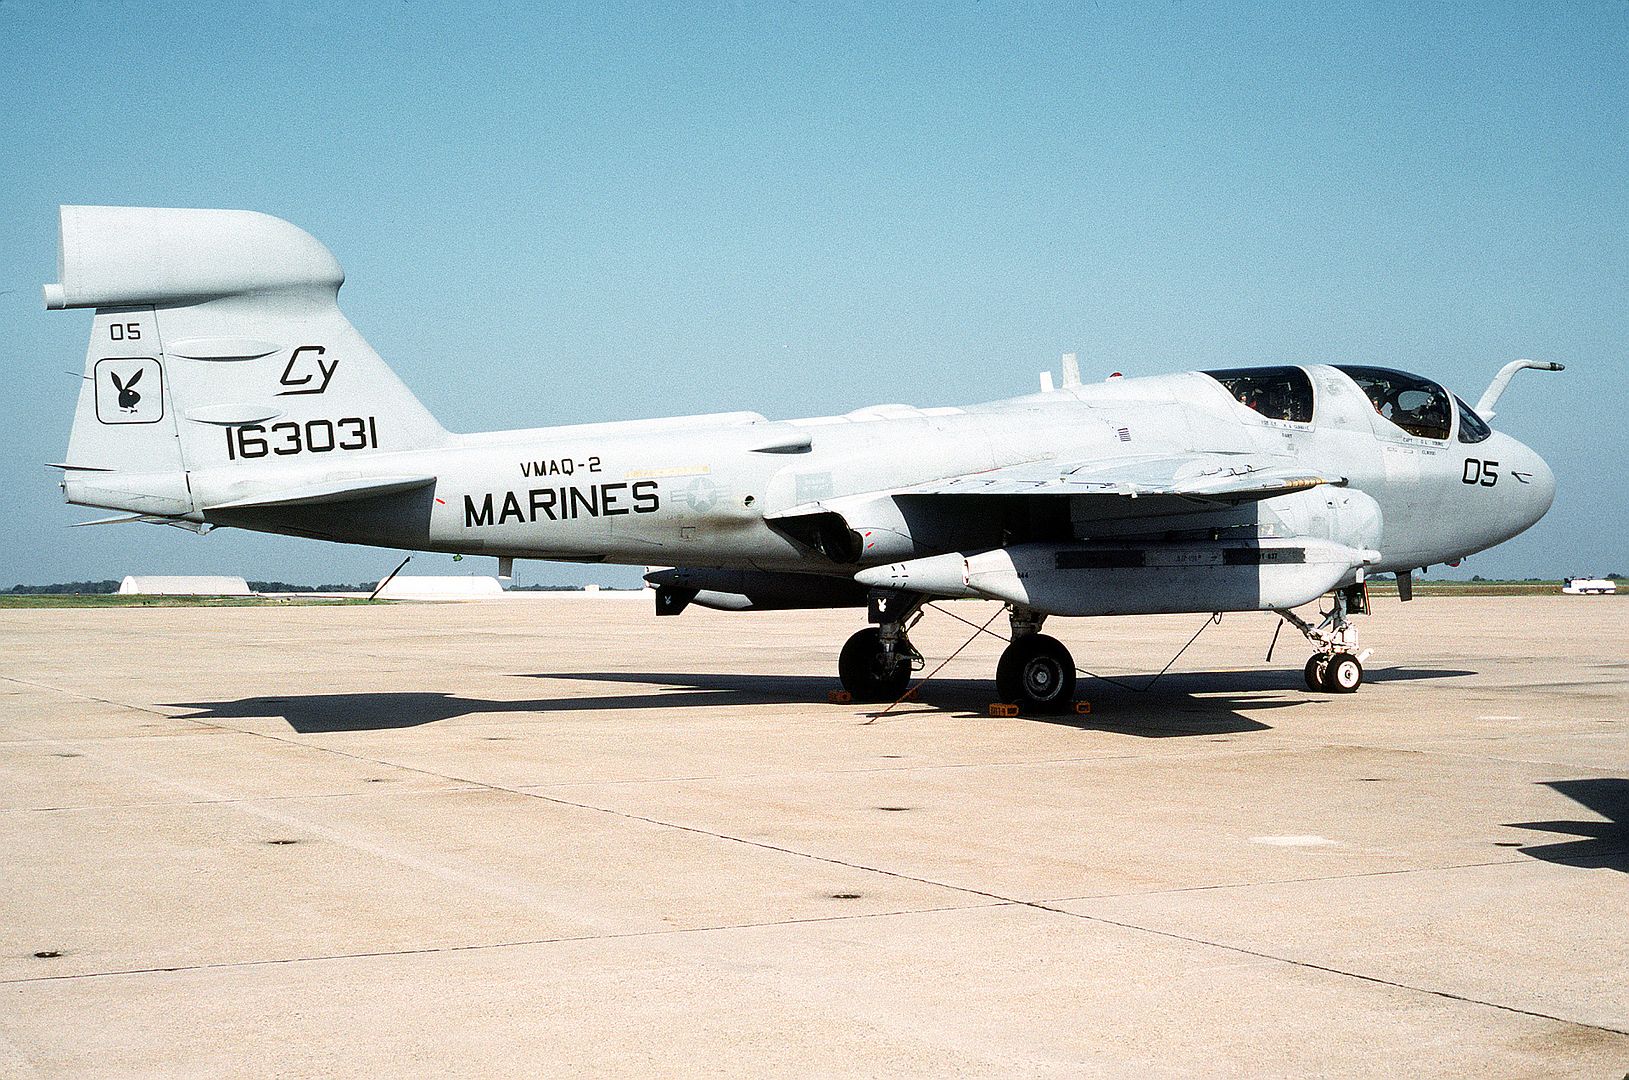 6B Prowler Aircraft Of Marine Tactical Electronic Warfare Squadron 2 Of Marine Air Group Two Parked On The Flight Line